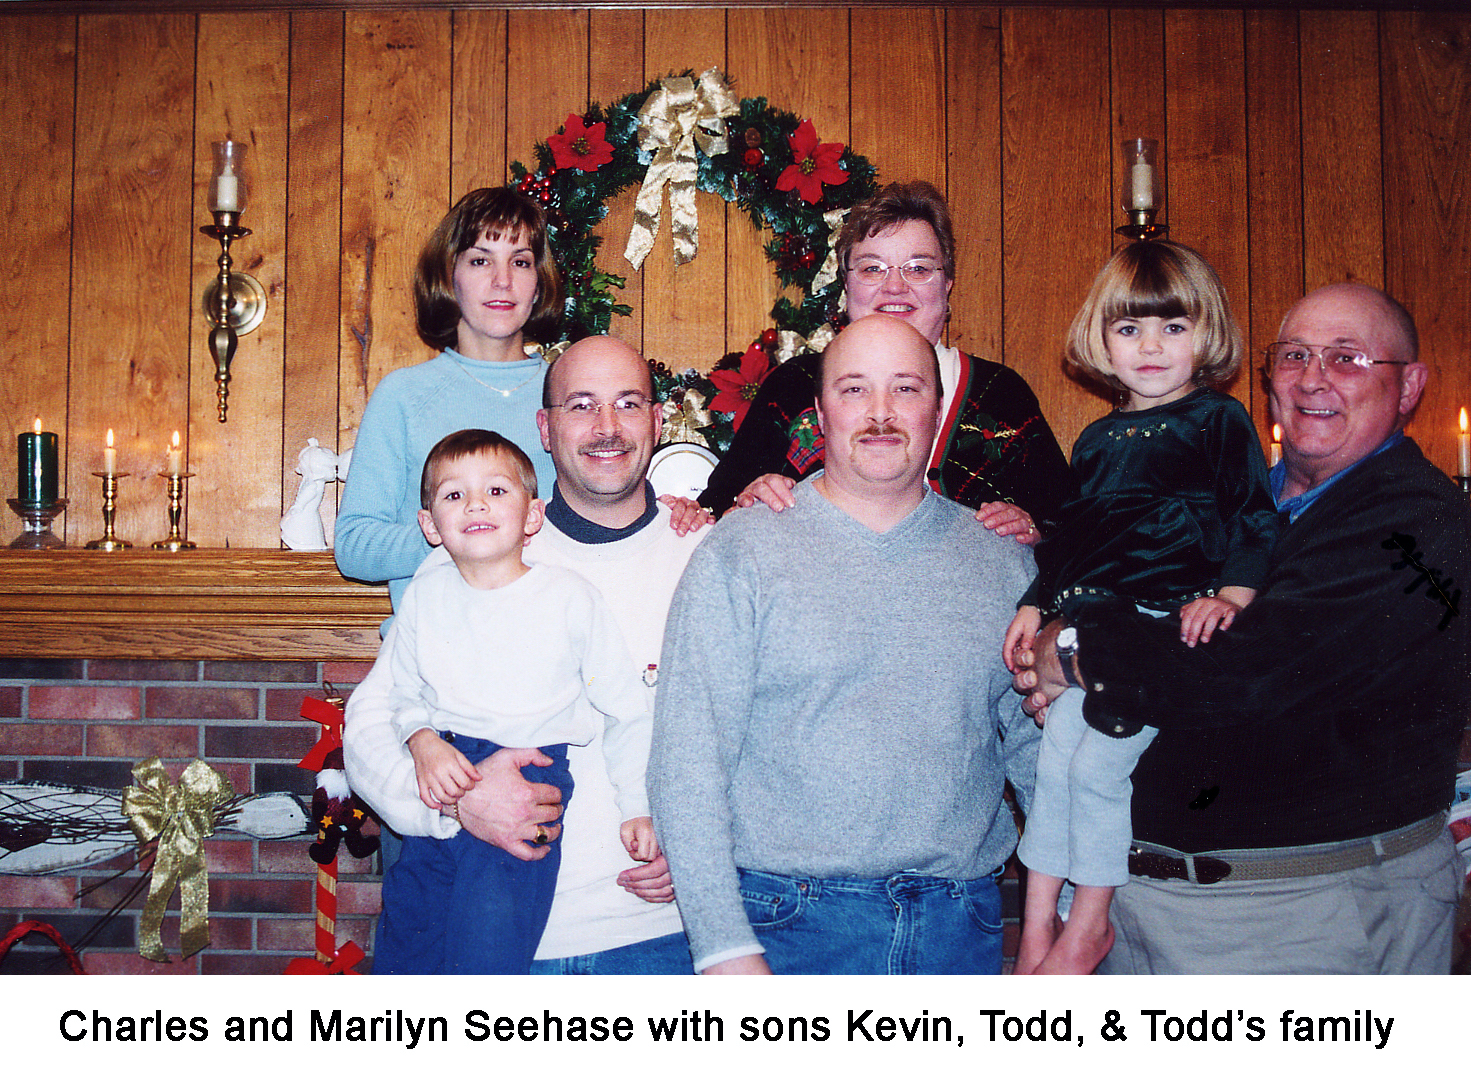 Charles and Marilyn Seehase with their family posed in front of the fireplace and a large wreath